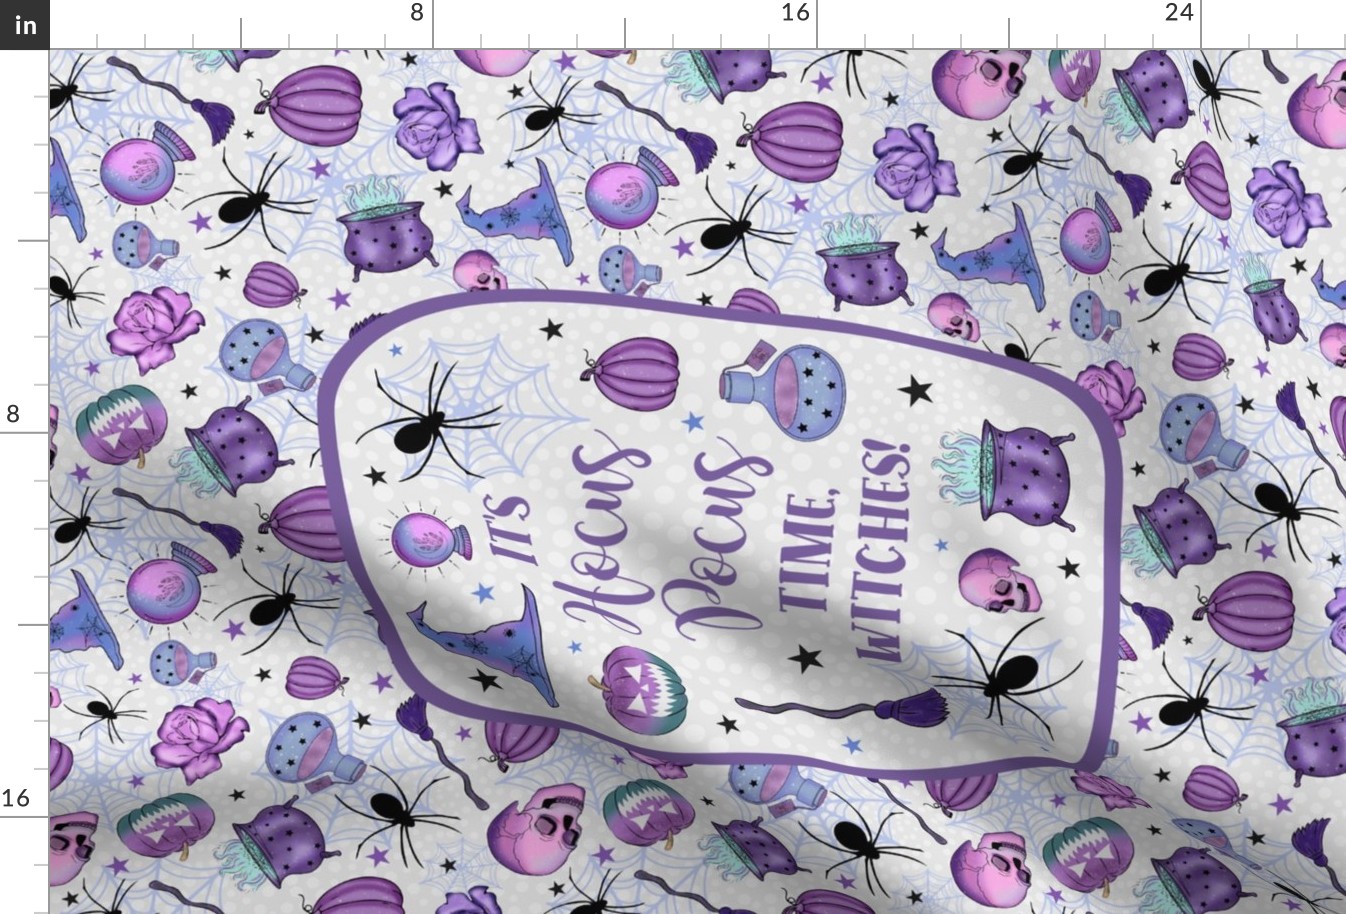 Large 27x18 Fat Quarter Panel It's Hocus Pocus Time, Witches! for Wall Art Hanging or Tea Towel